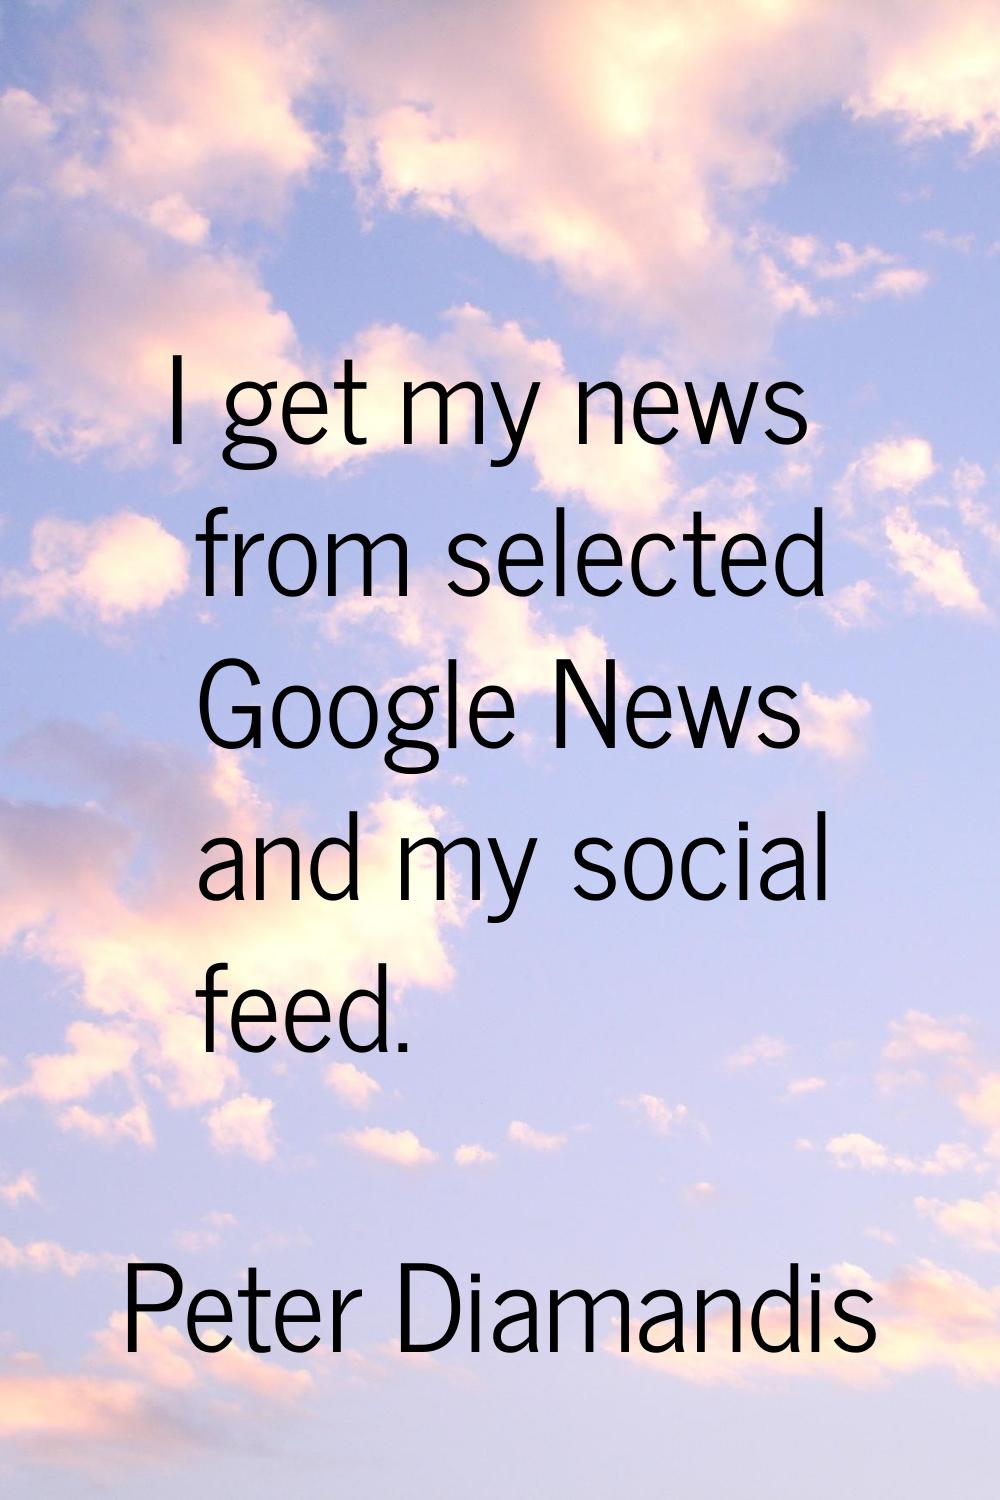 I get my news from selected Google News and my social feed.